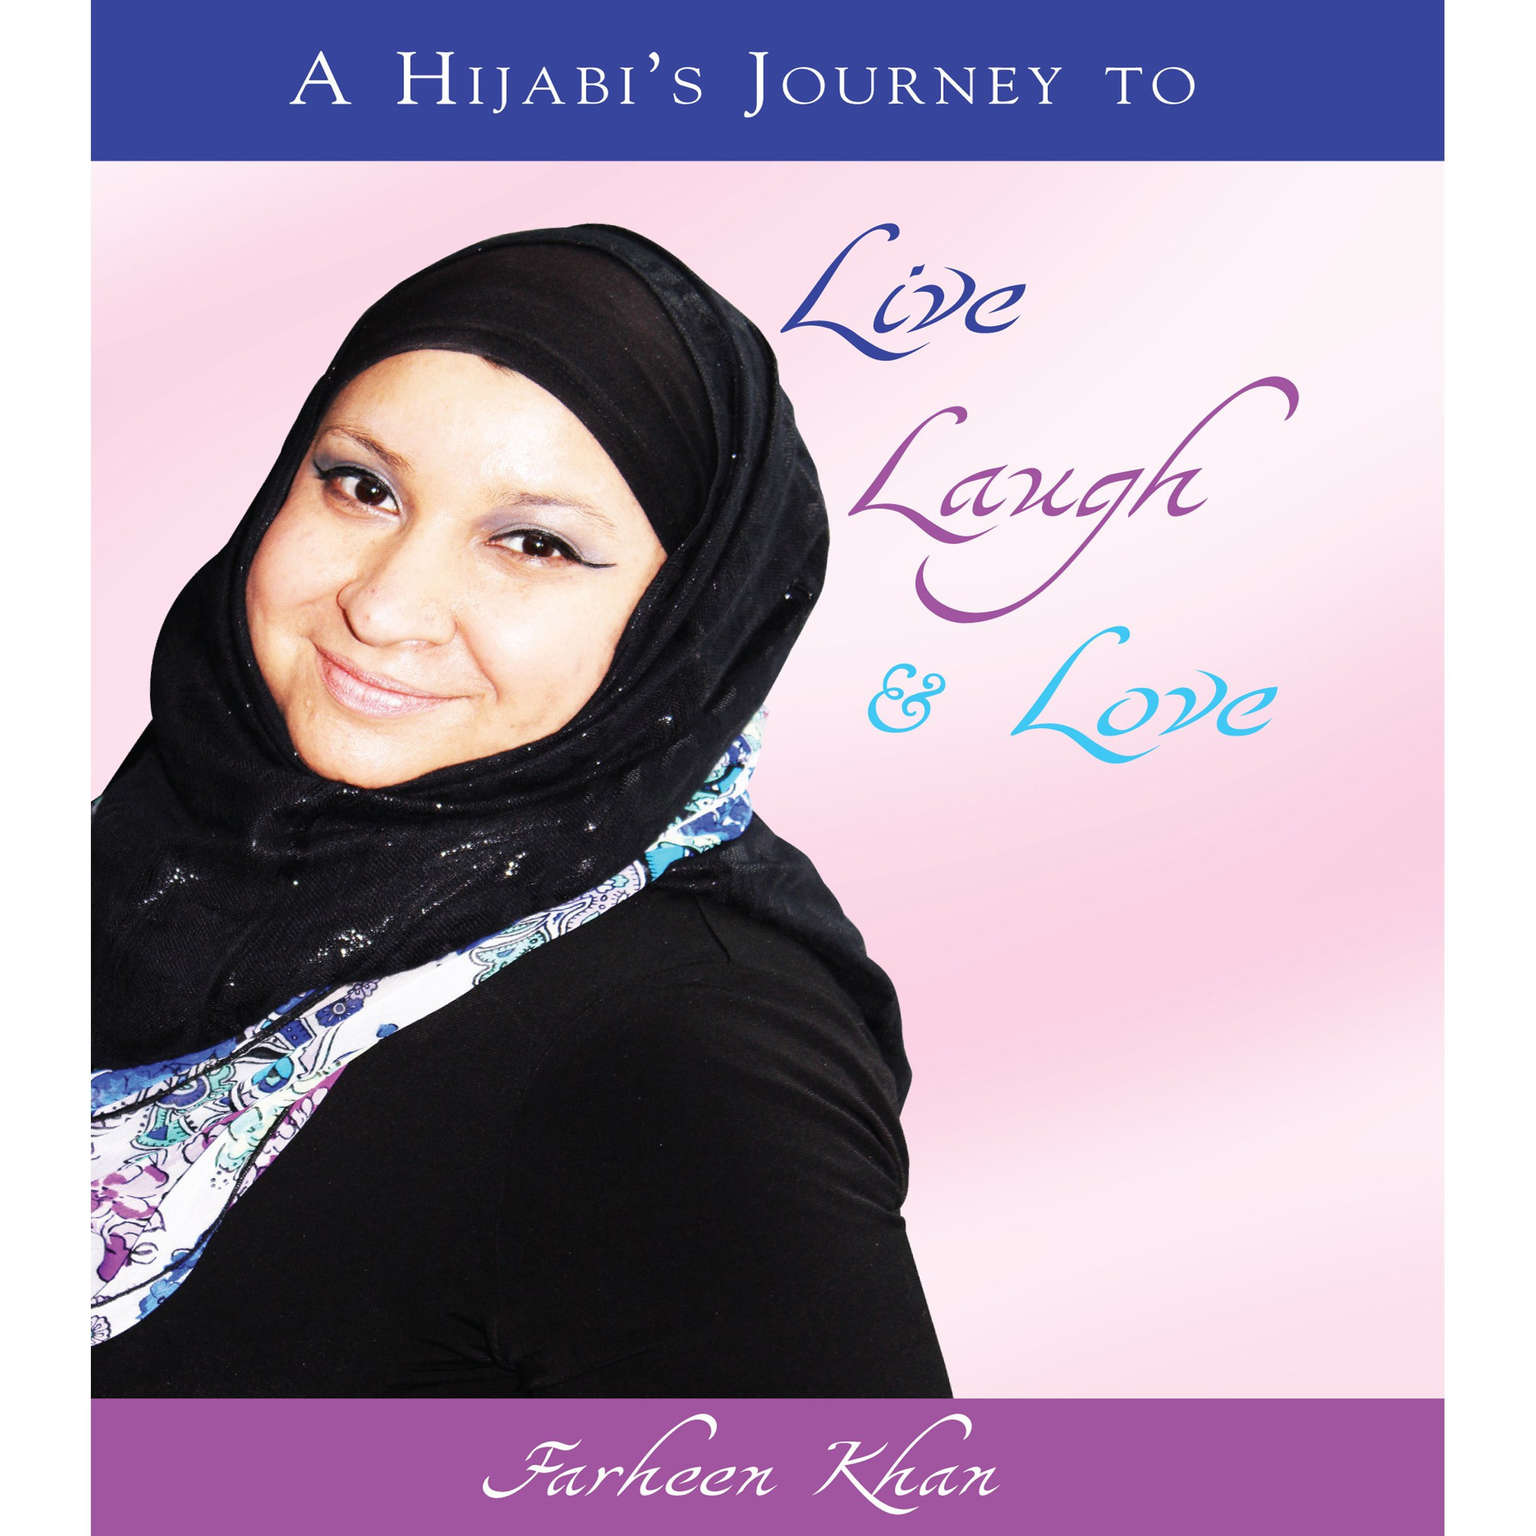 A Hijabis Journey to Live, Laugh & Love Audiobook, by Farheen Khan